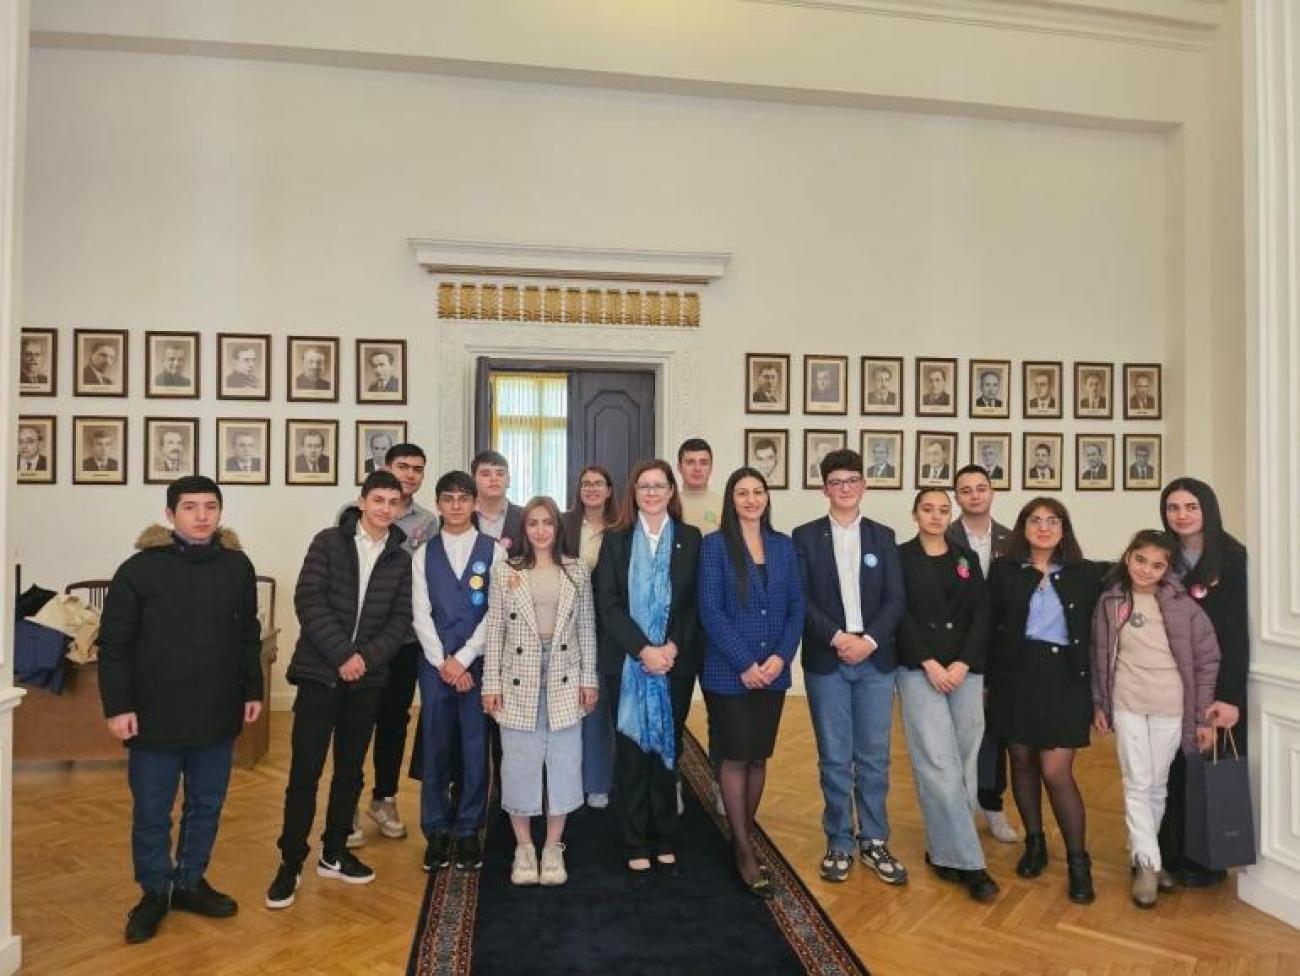 UNICEF Representative Christine Weigand joined Human Rights Defender of Armenia Anahit Manasyan and 13 members of the HRD public council on children’s and youth rights.